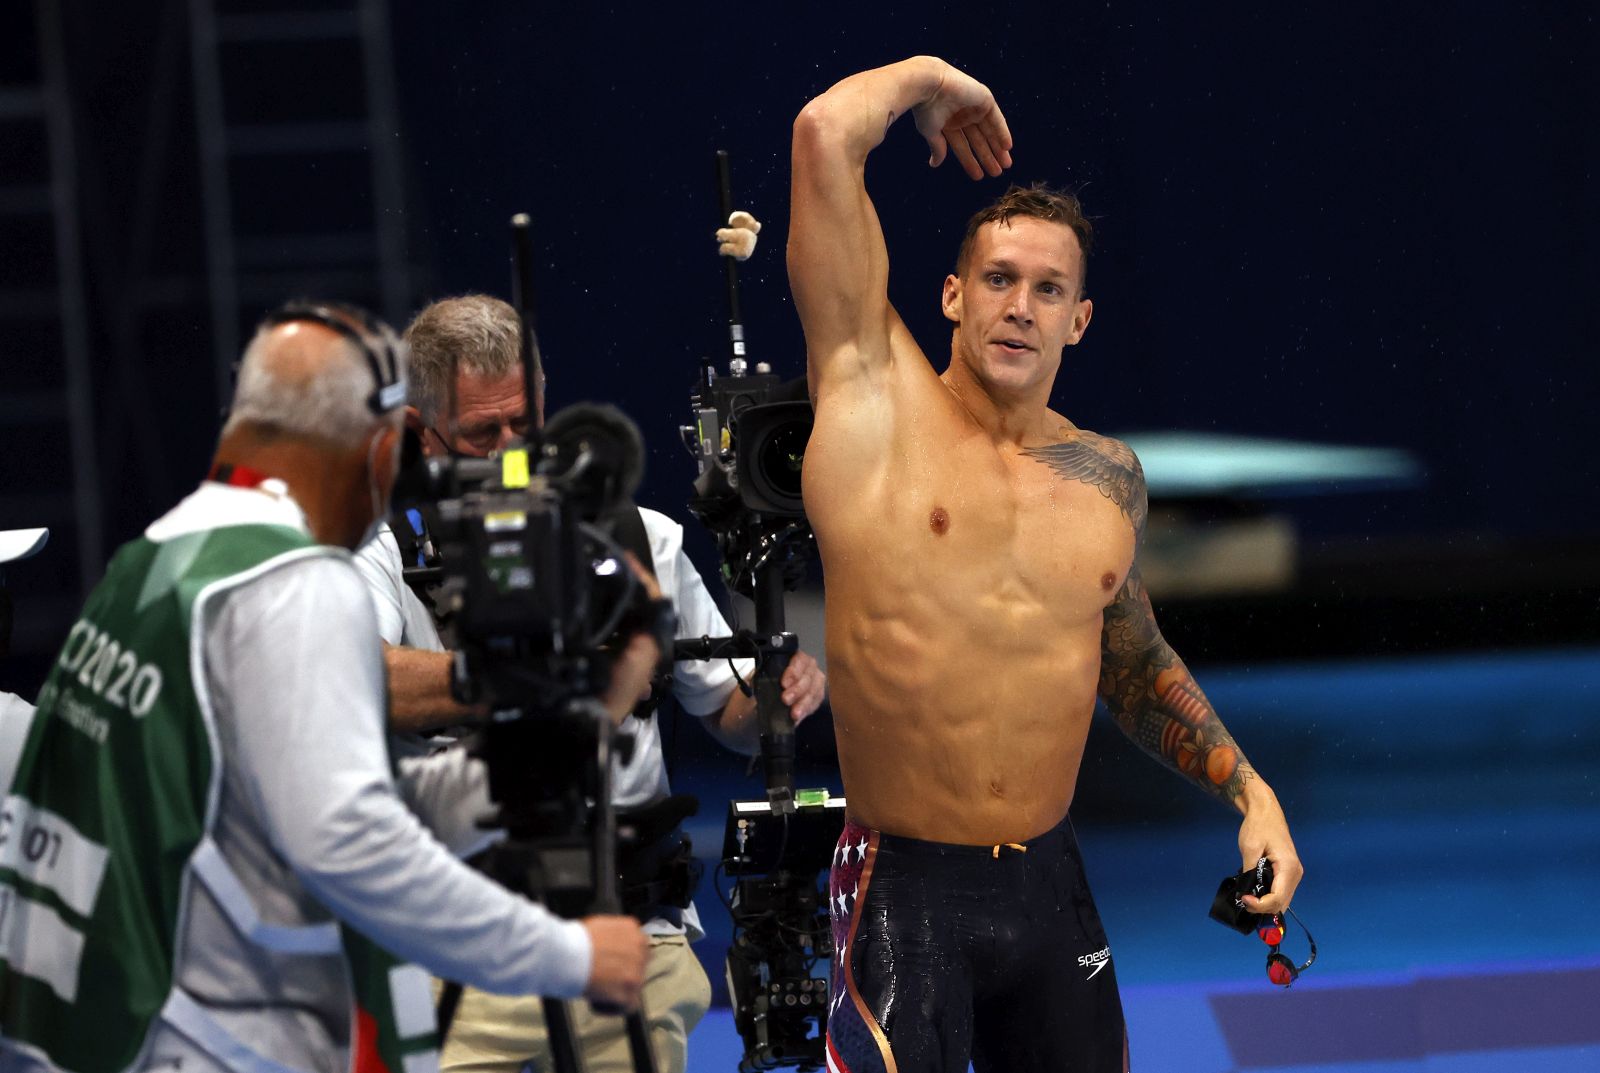 epa09383503 Caeleb Dressel of the US reacts after winning the gold medal in the Men's 50m Freestyle Final during the Swimming events of the Tokyo 2020 Olympic Games at the Tokyo Aquatics Centre in Tokyo, Japan, 01 August 2021.  EPA/HOW EWEE YOUNG